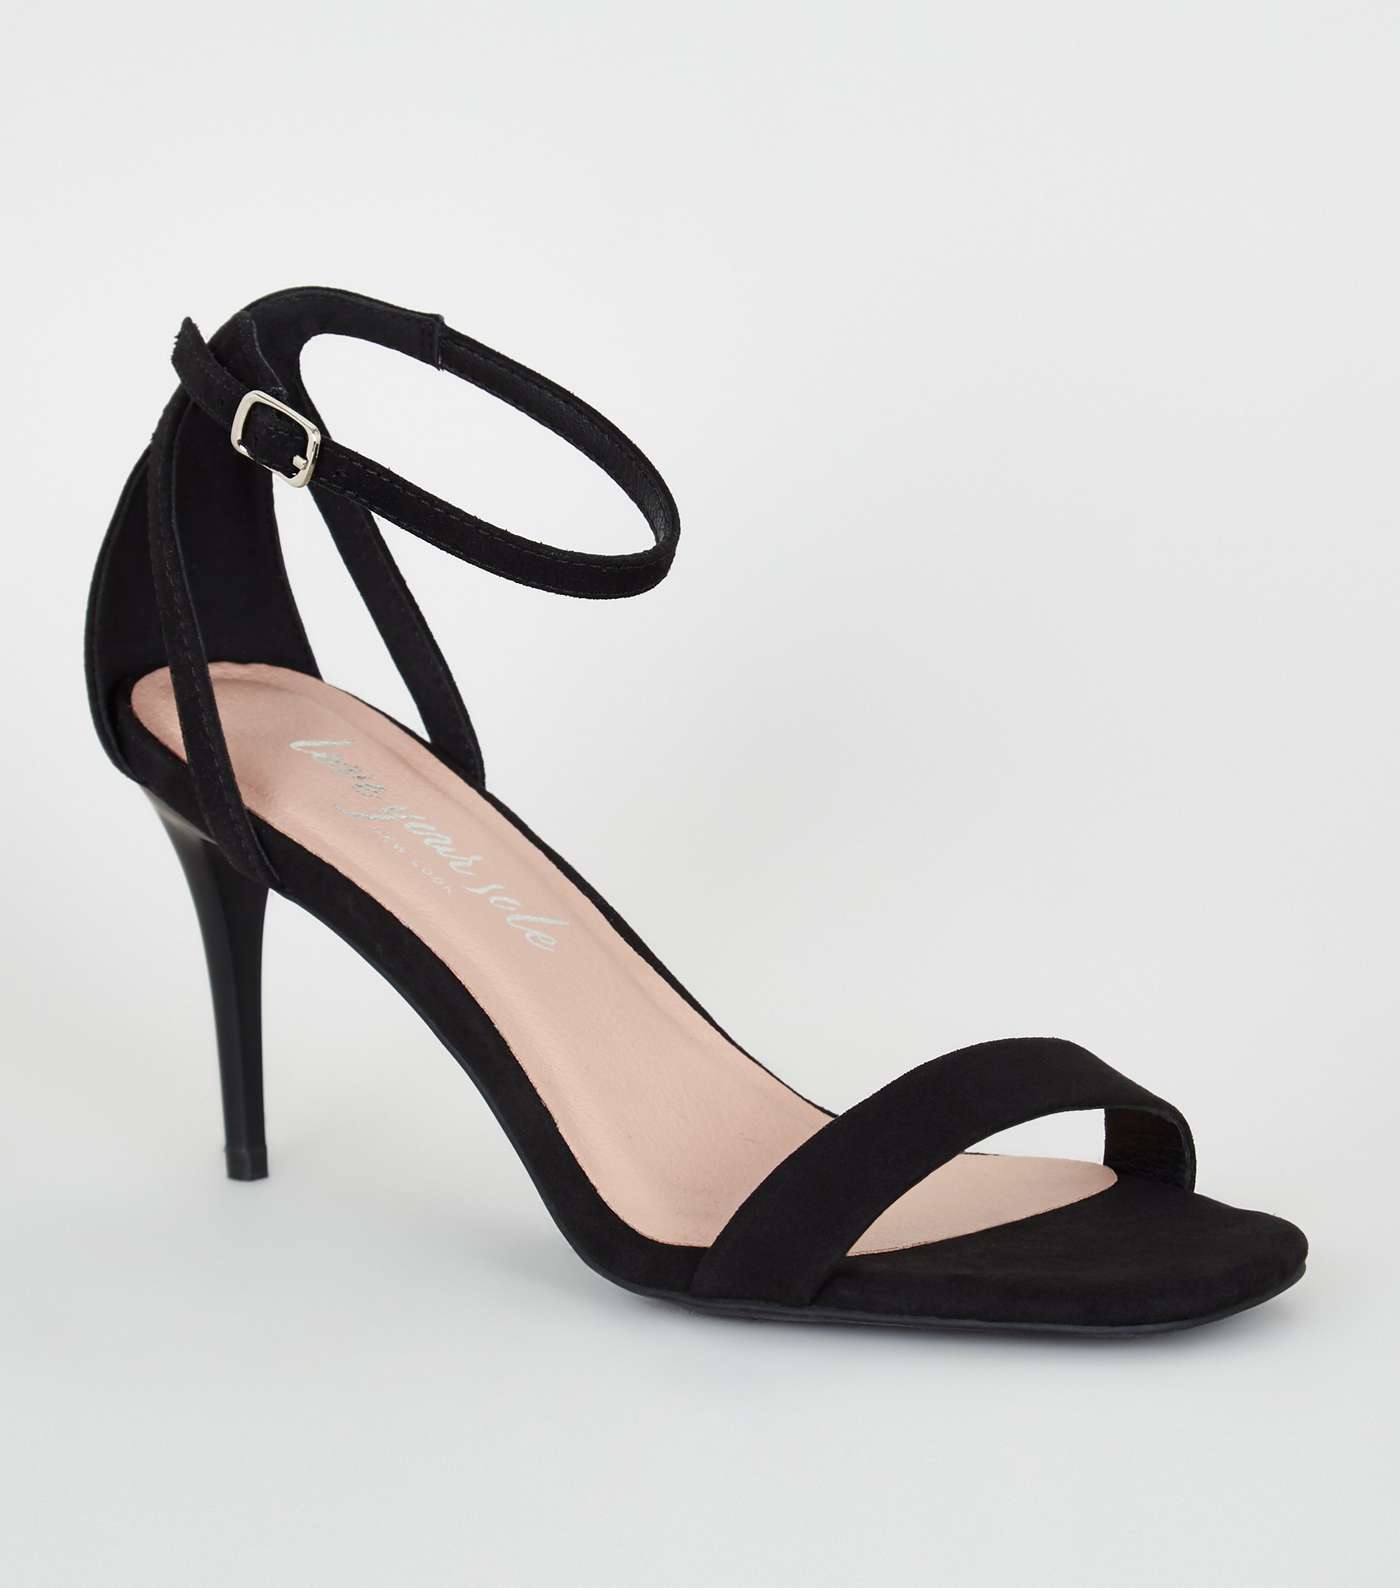 Black Suedette Barely There Stiletto Heels